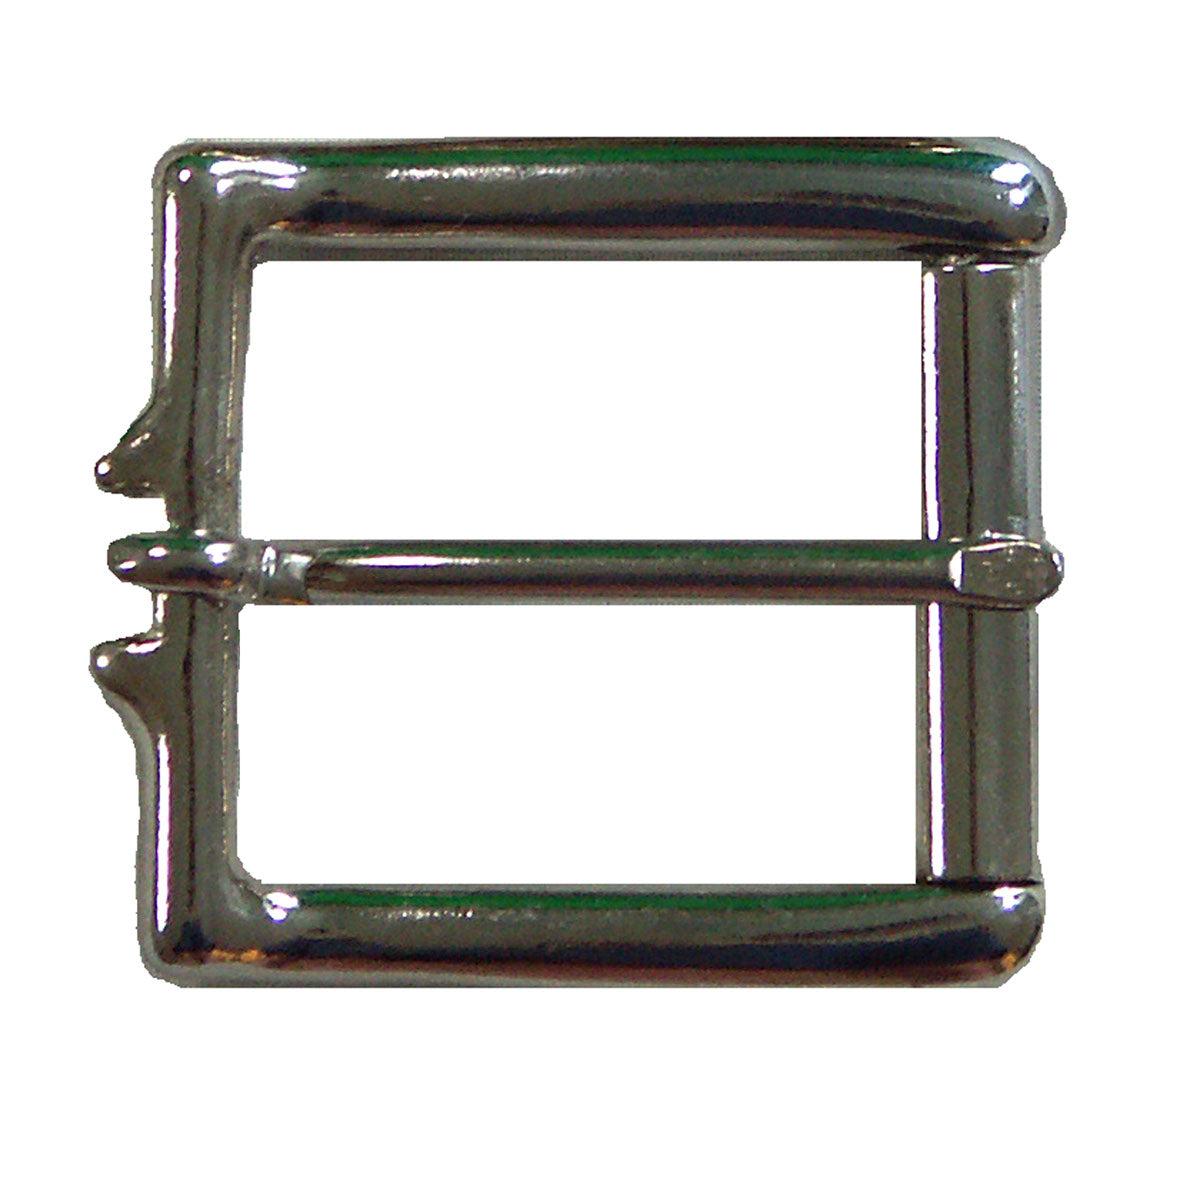 #49 Stainless Steel Buckle 1-1/2"